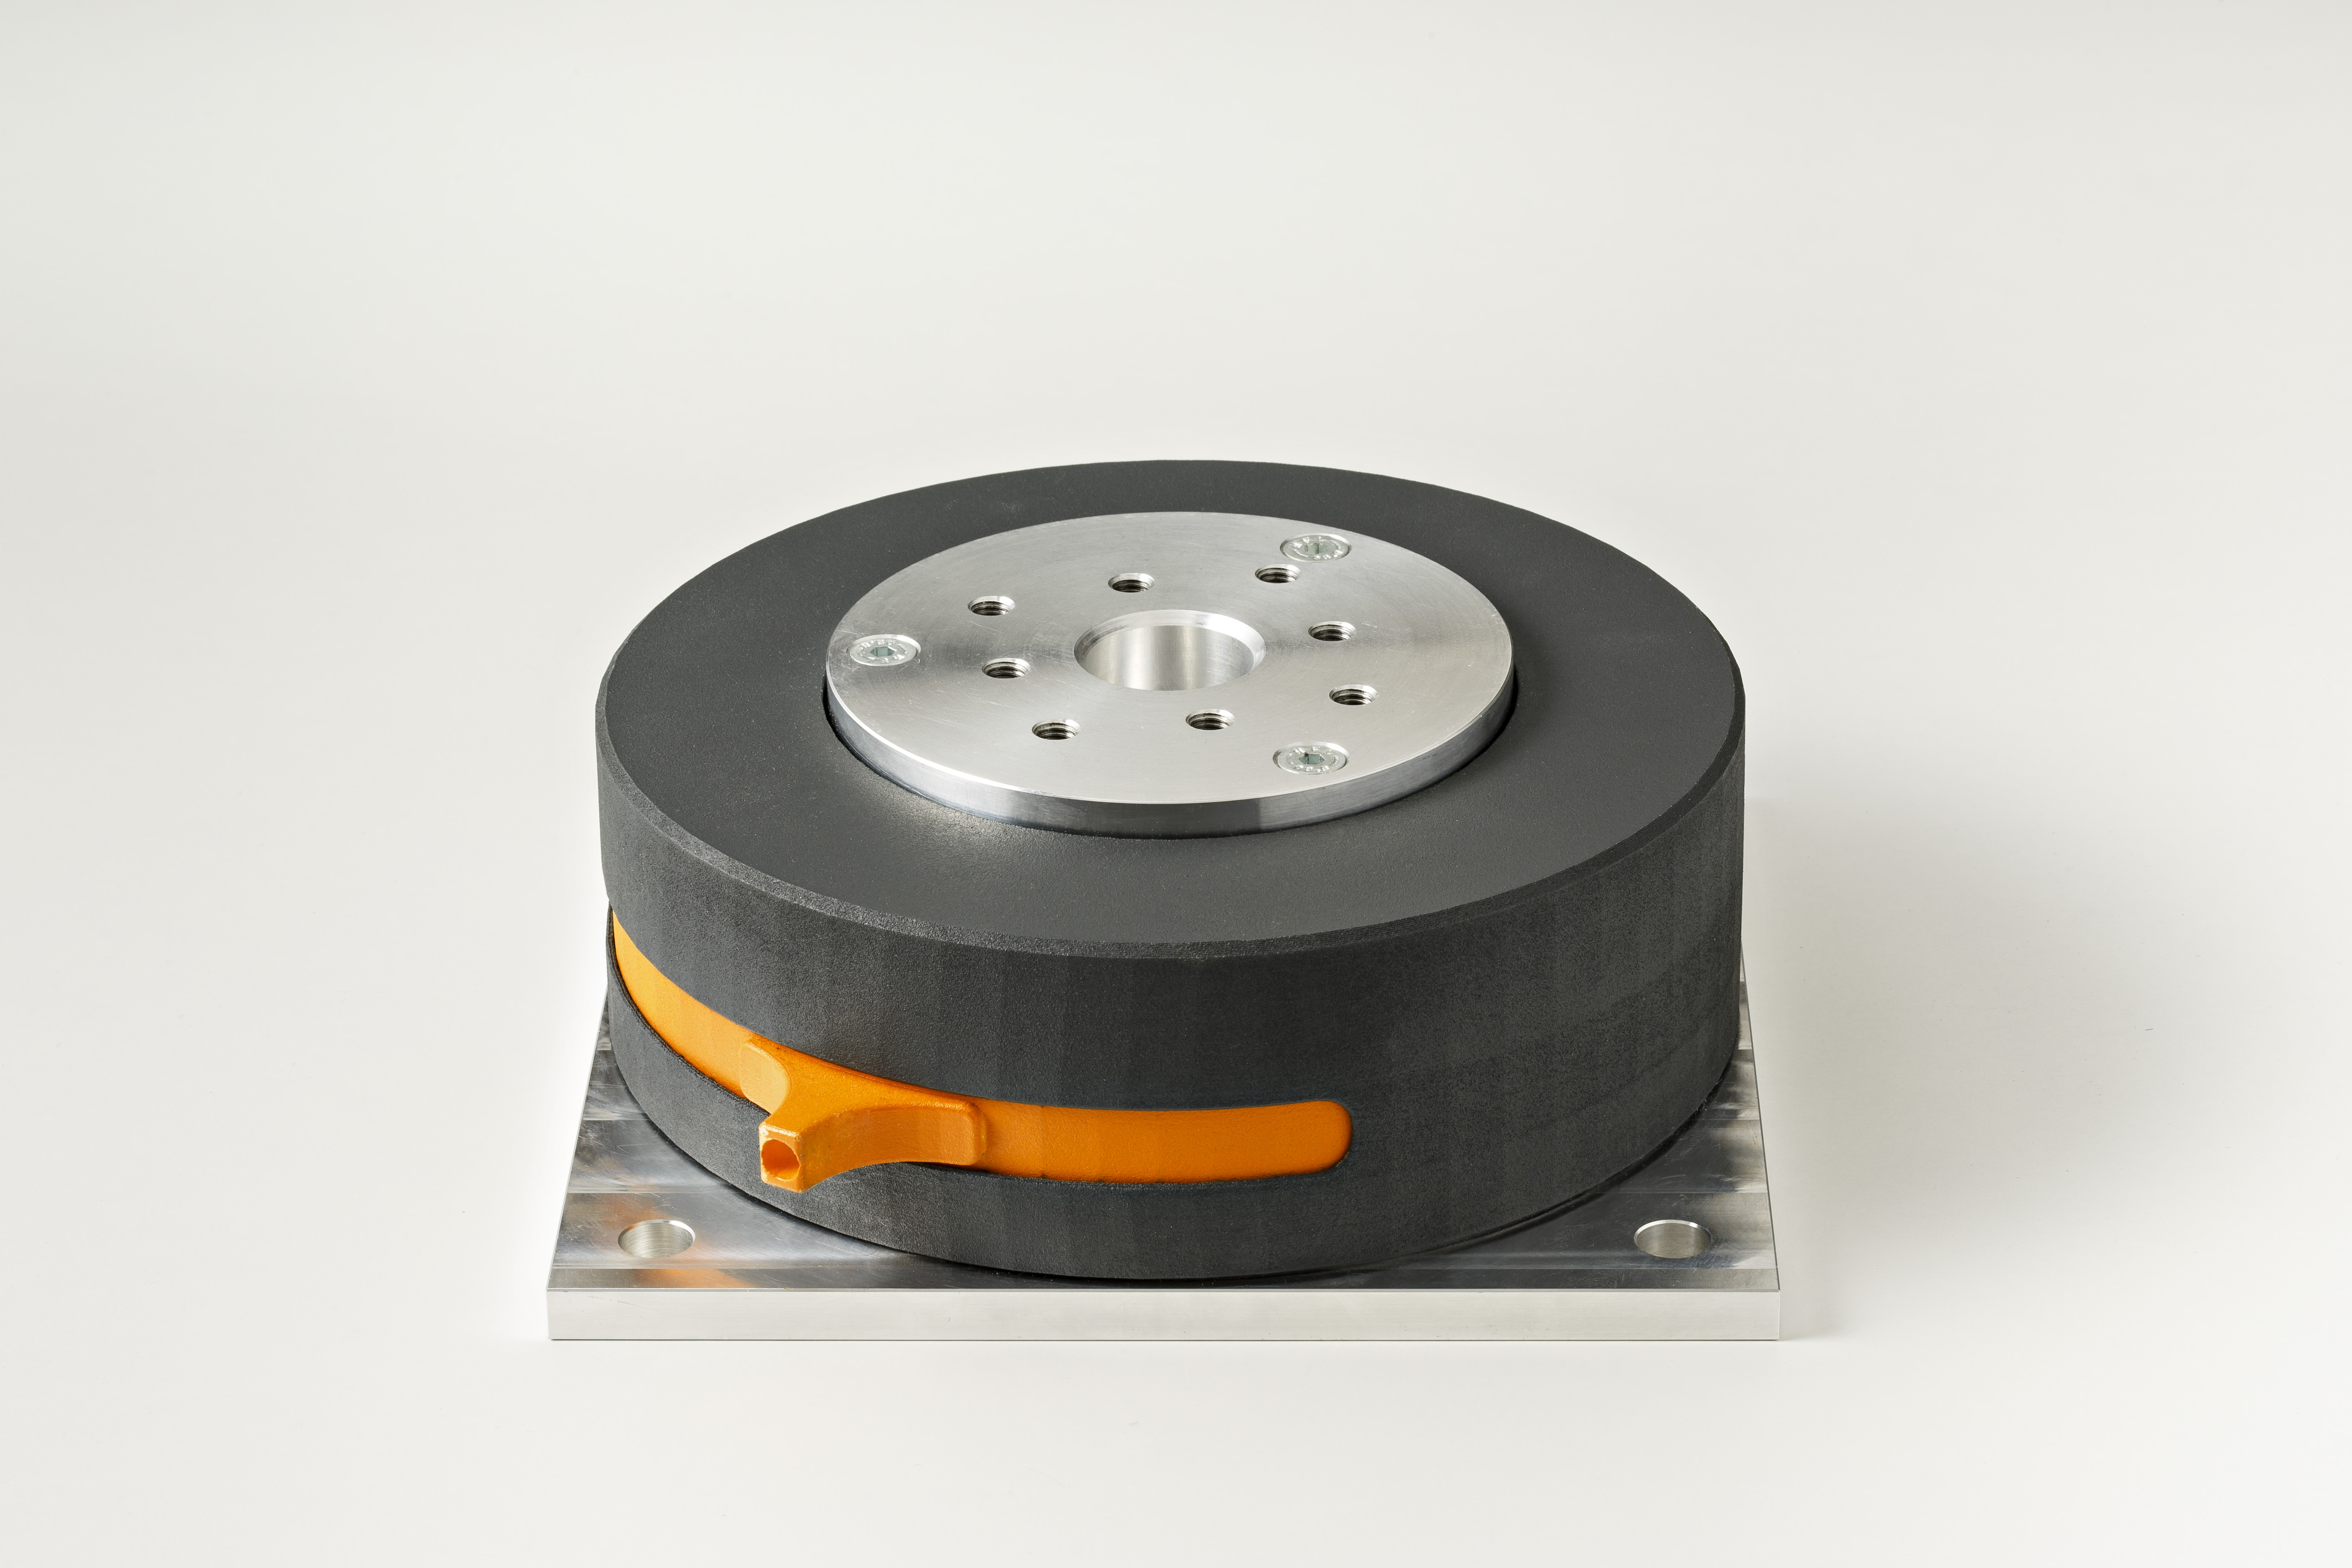 Tunable Mount by Fraunhofer LBF